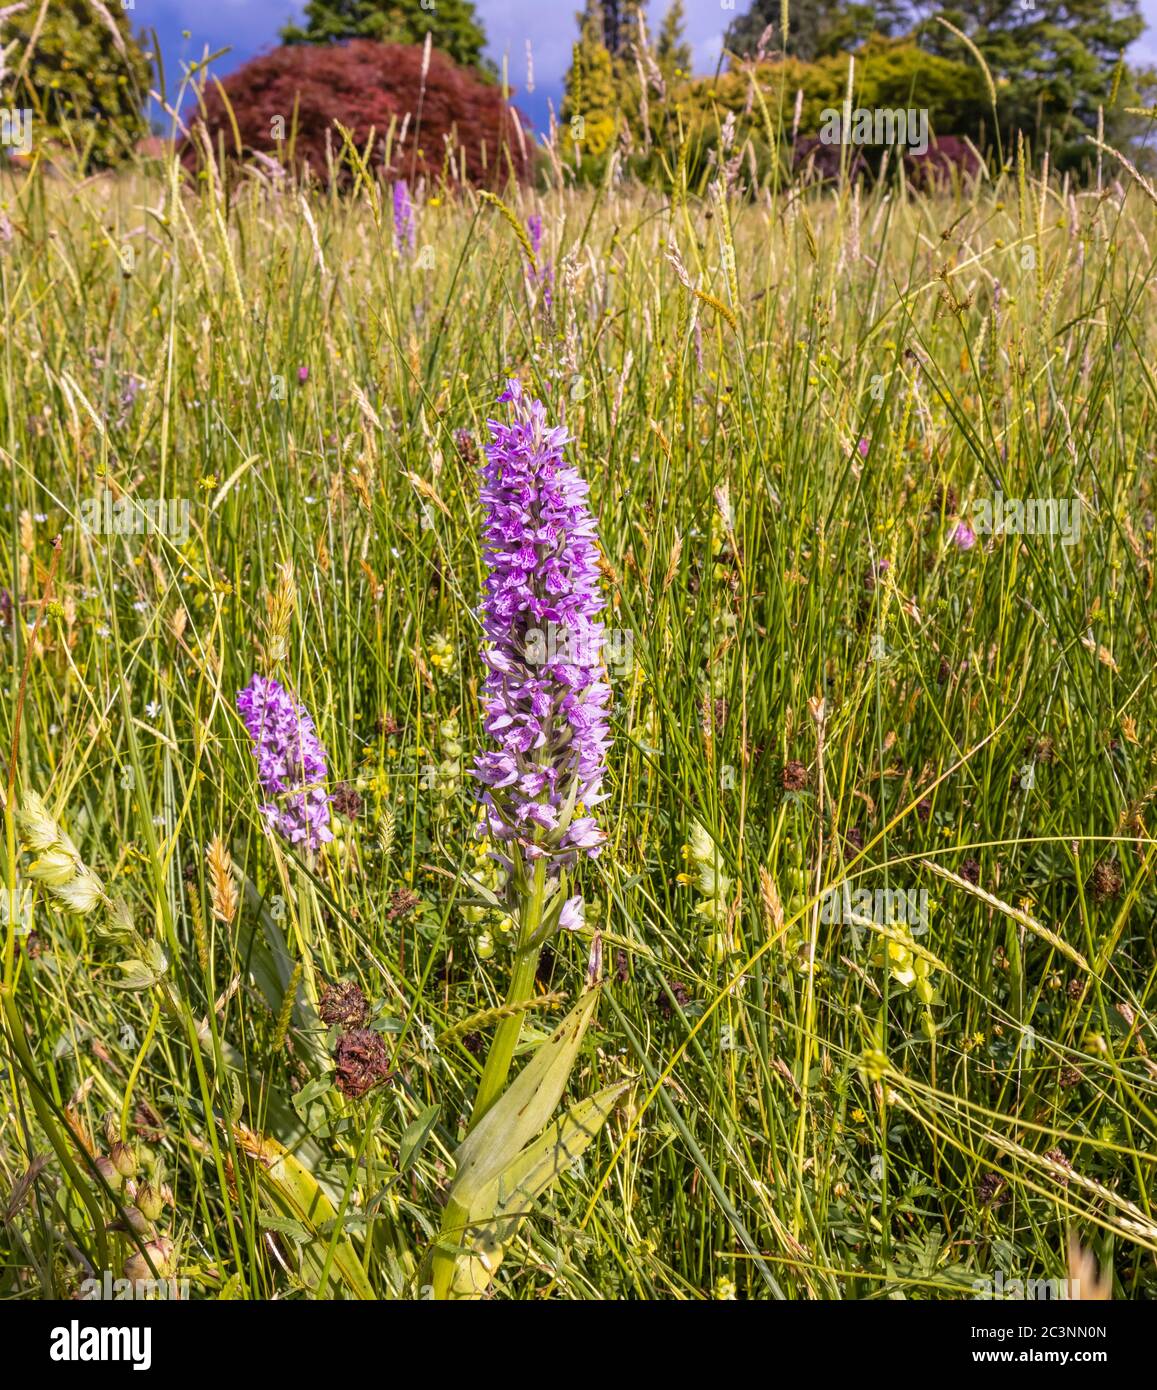 Purple common spotted orchid (Dactylorhiza fuchsii) flowering in the Alpine Meadow, RHS Garden Wisley, Surrey, in late spring / early summer Stock Photo